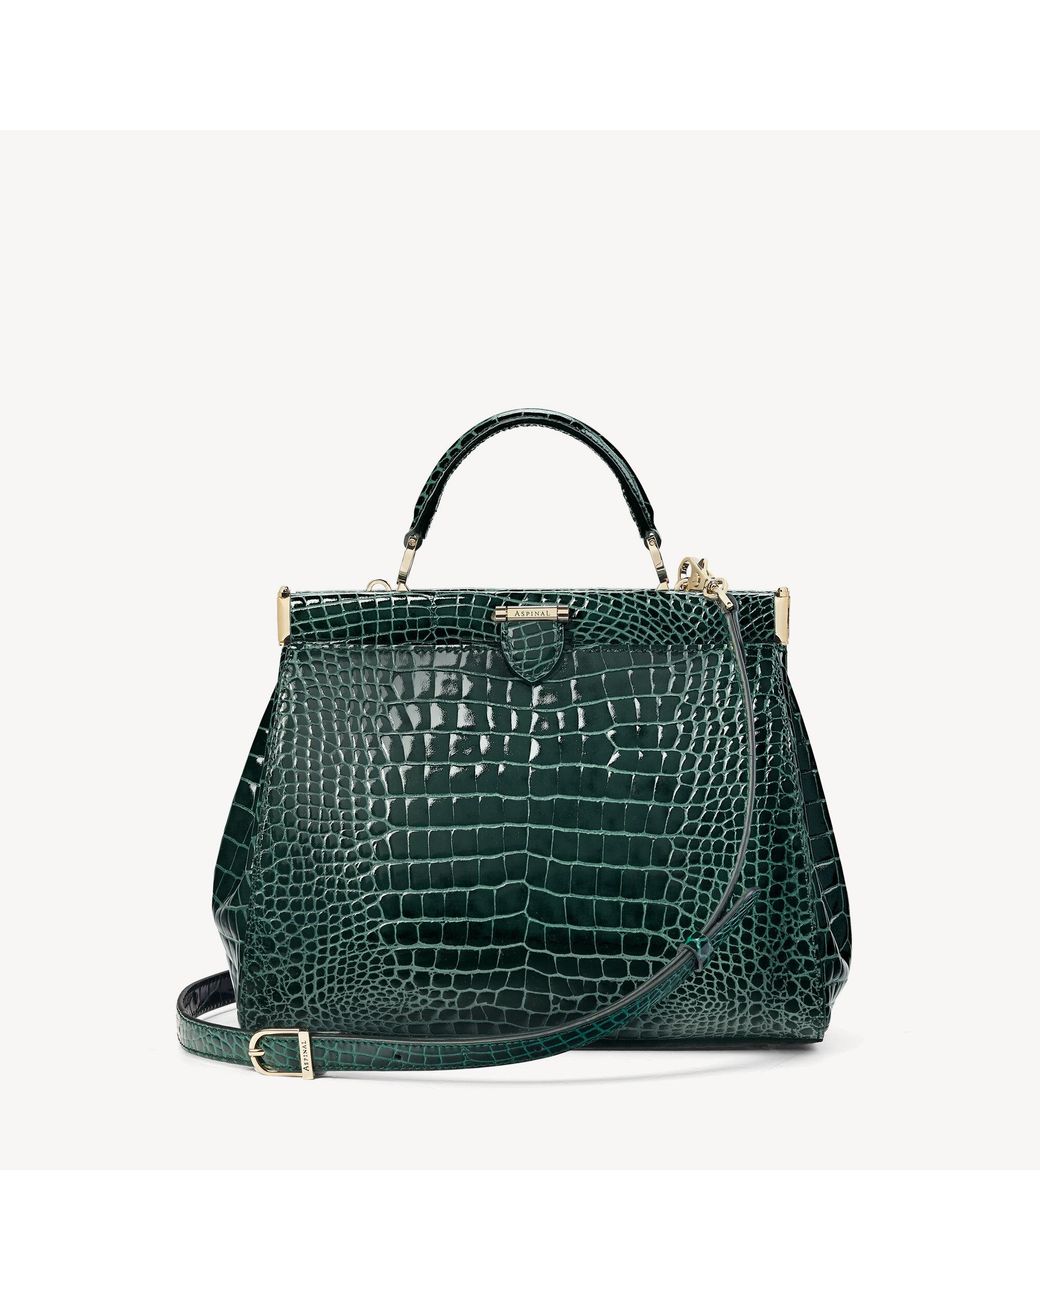 Aspinal of London Leather Small Florence Frame Bag in Green - Lyst